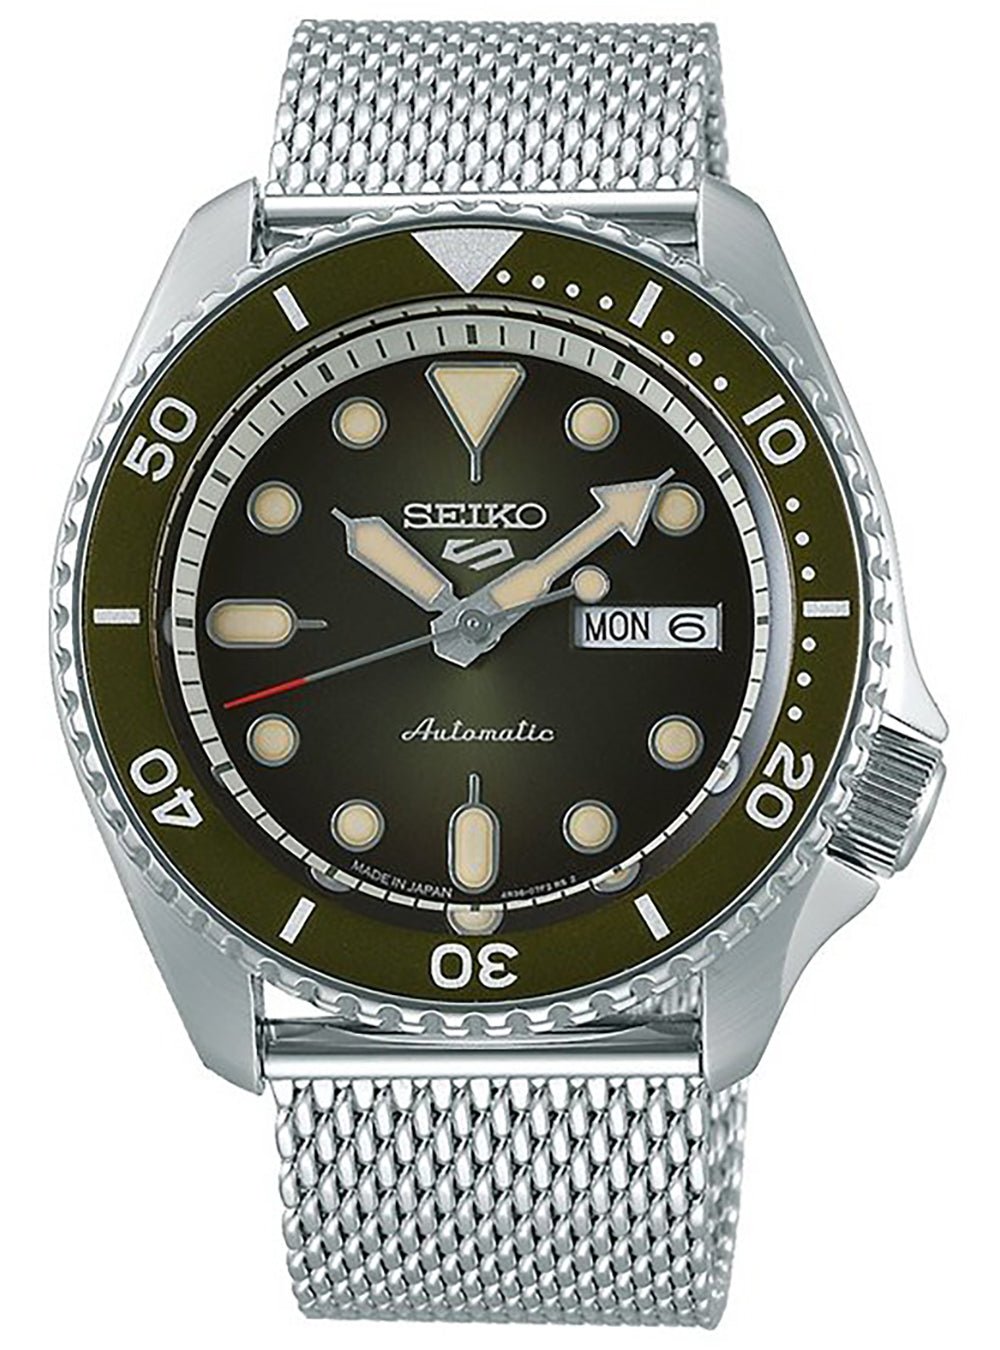 Seiko 5 Sports Suits Style SBSA019 Automatic Mechanical 2019 Made in japan JDMWatchesjapan-select